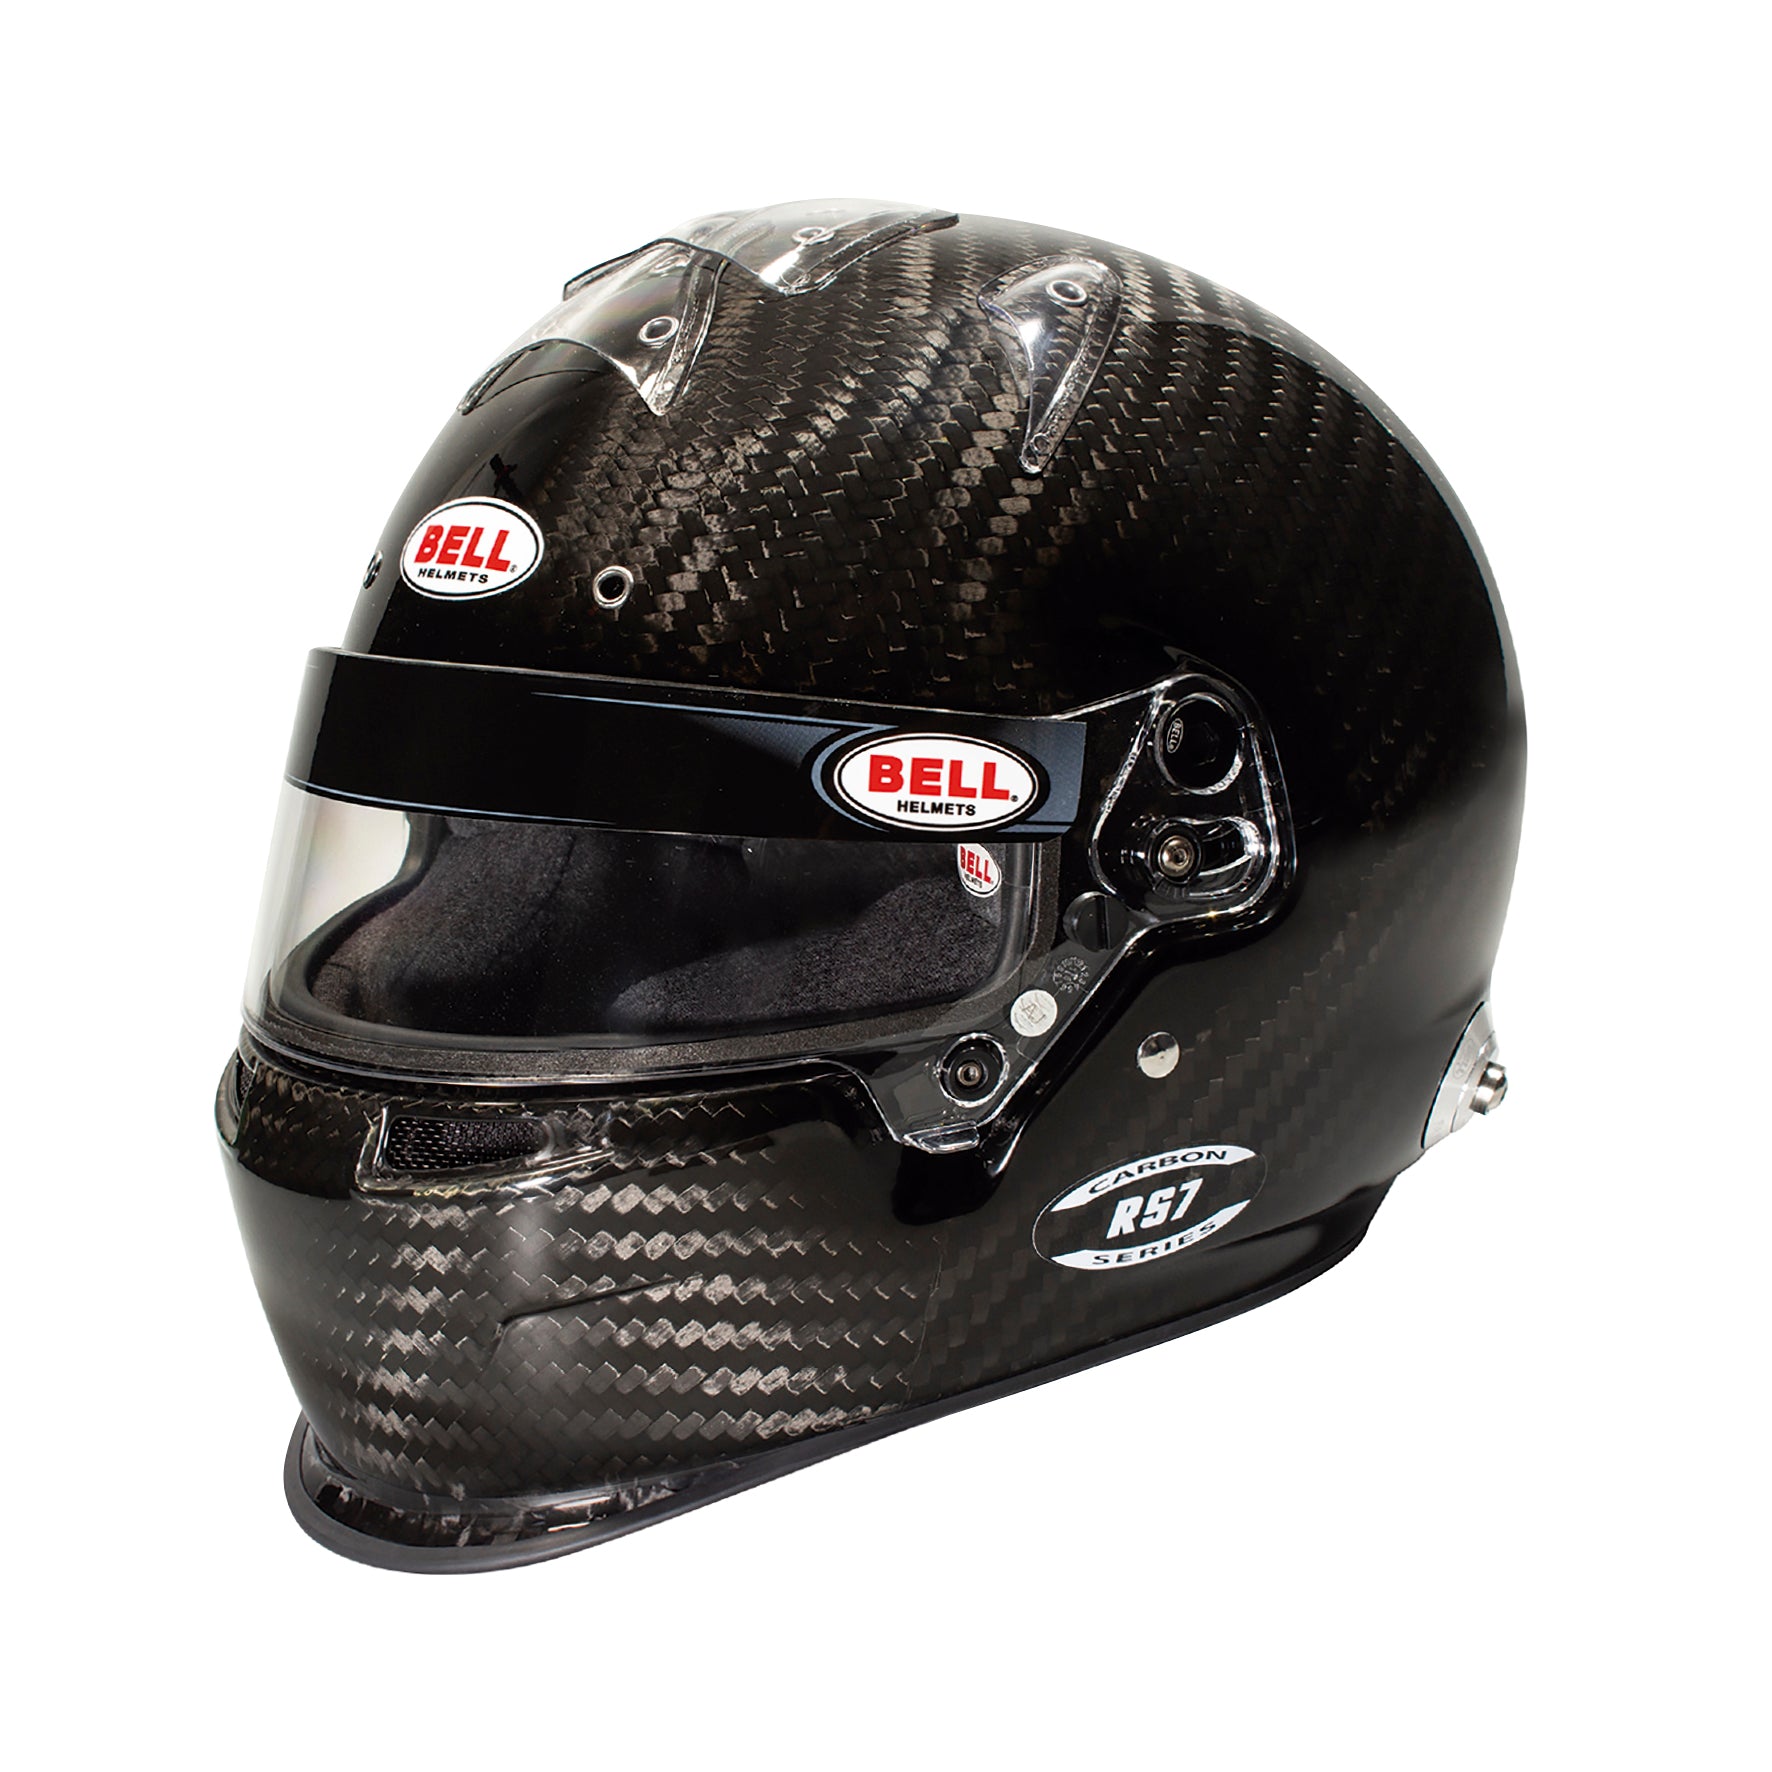 BELL 1204A07 Шолом full face RS7 CARBON DUCKBILL, HANS, FIA, size 58 (7 1/4) Photo-1 